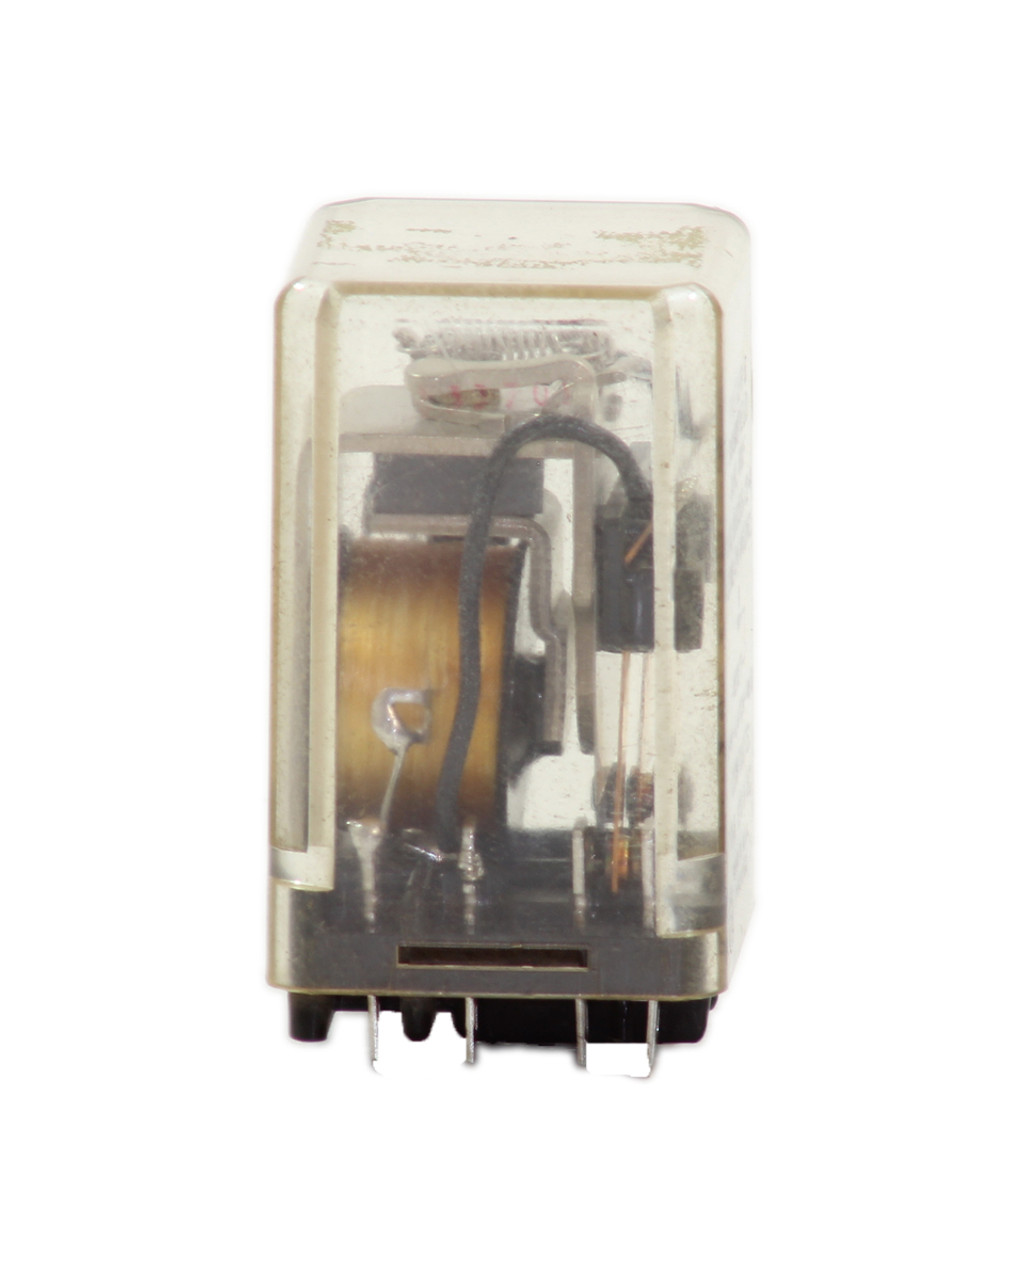 Potter and Brumfield KUL11A15S24 General Purpose Relays 10A 120V 11PINS Coil:24V 60Hz